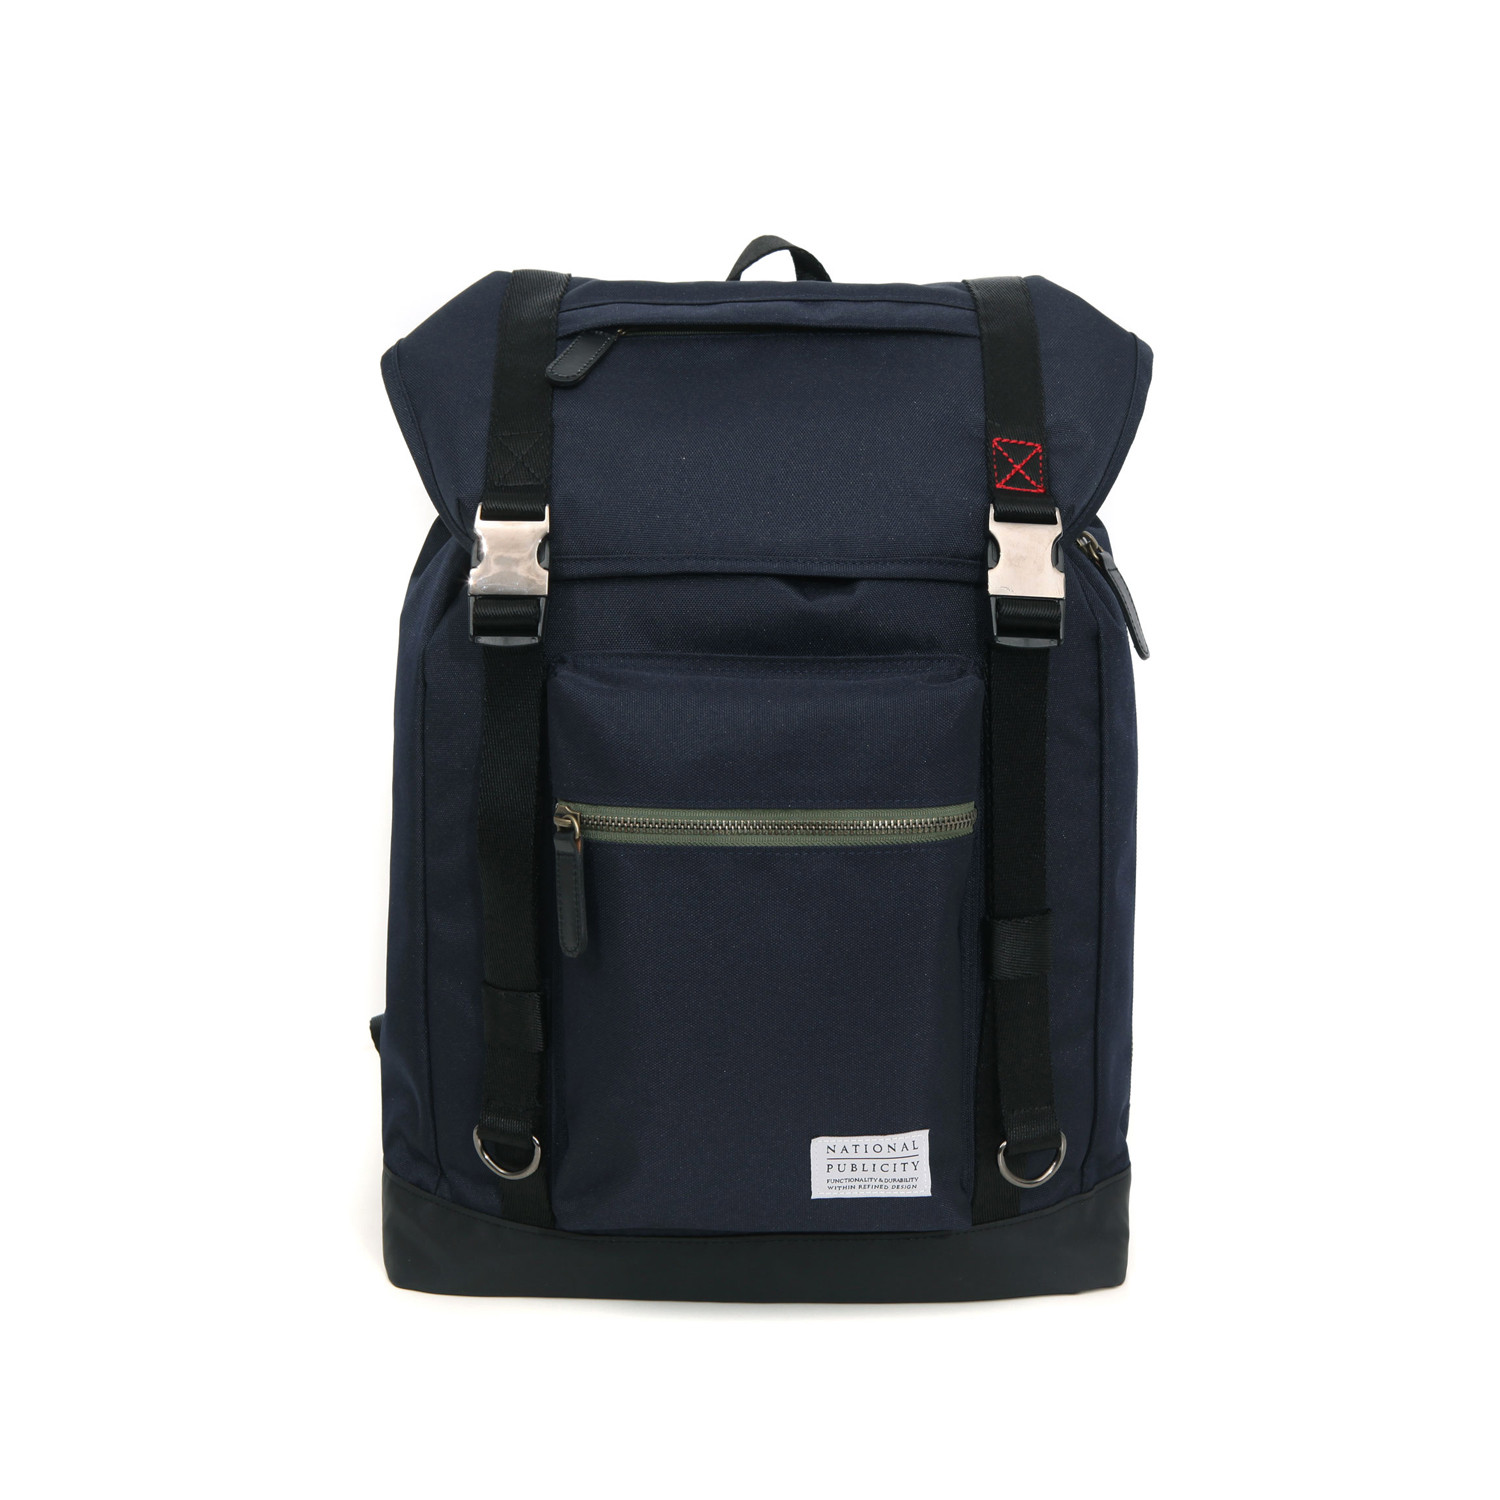 Lancaster Backpack (Black) - National Publicity - Touch of Modern